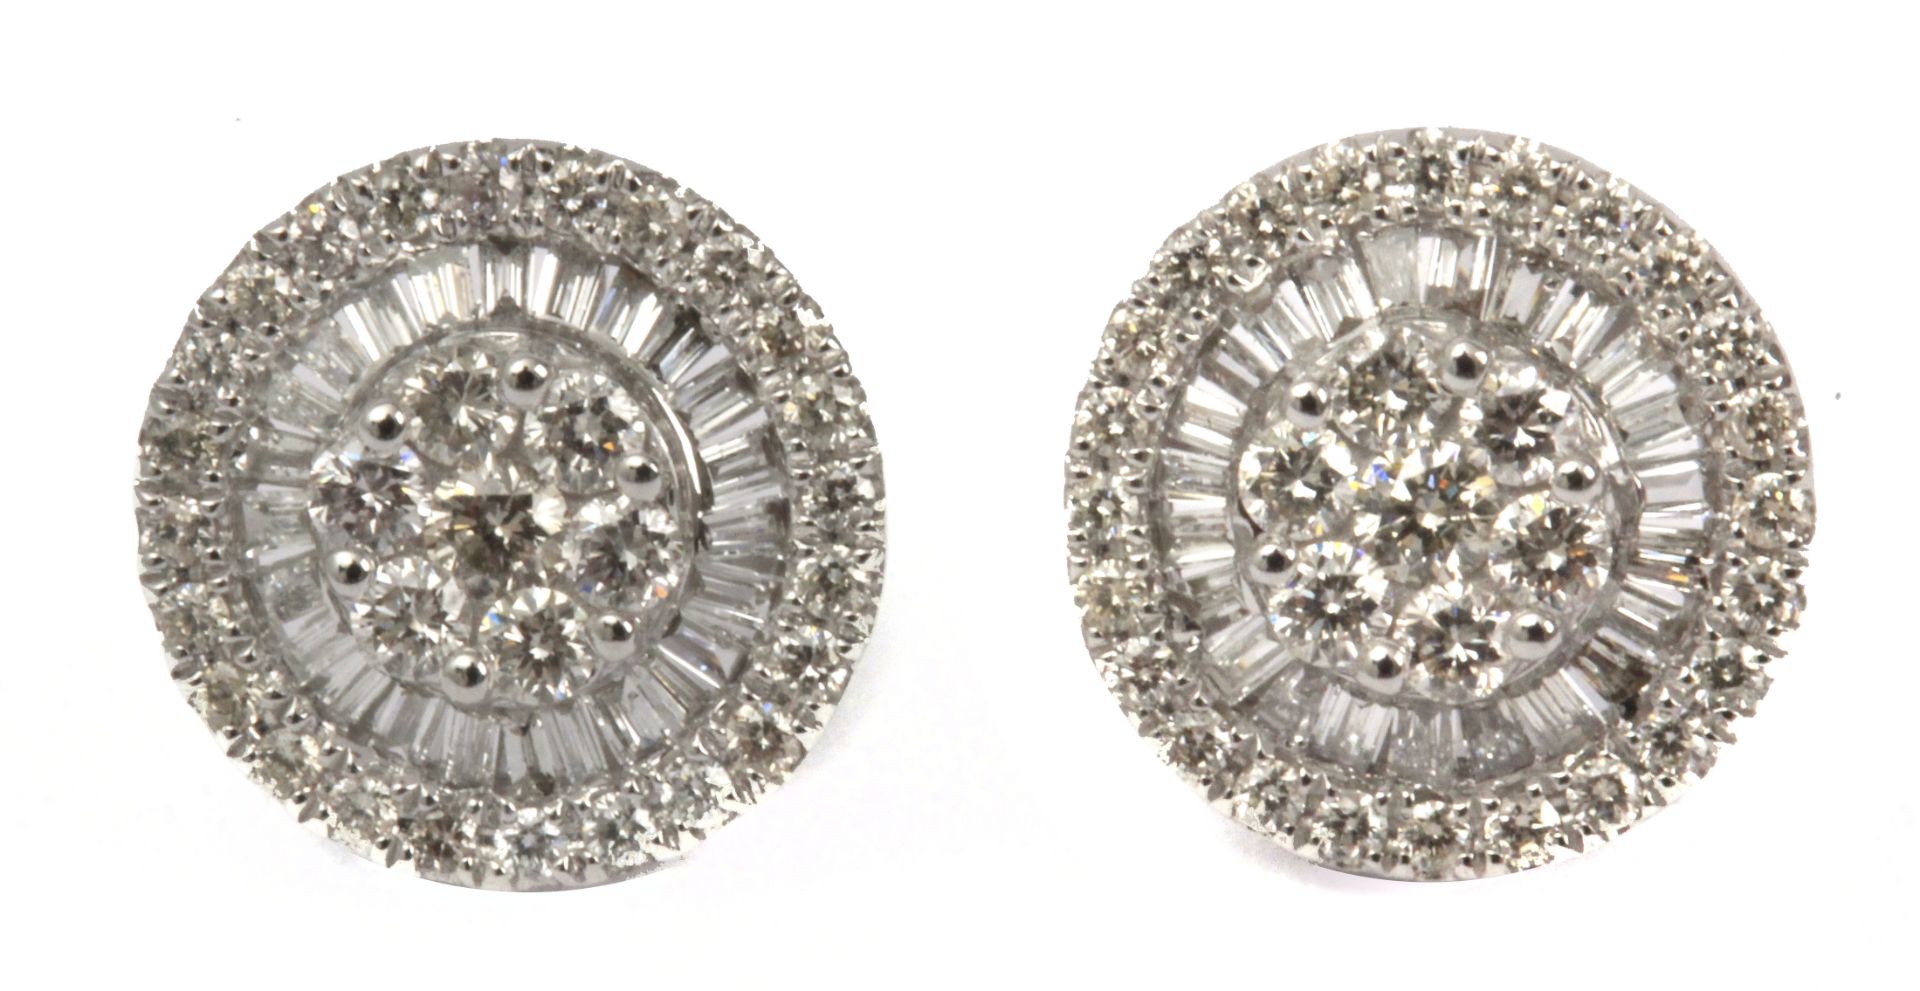 A pair of diamond cluster earrings with an 18 k. white gold setting